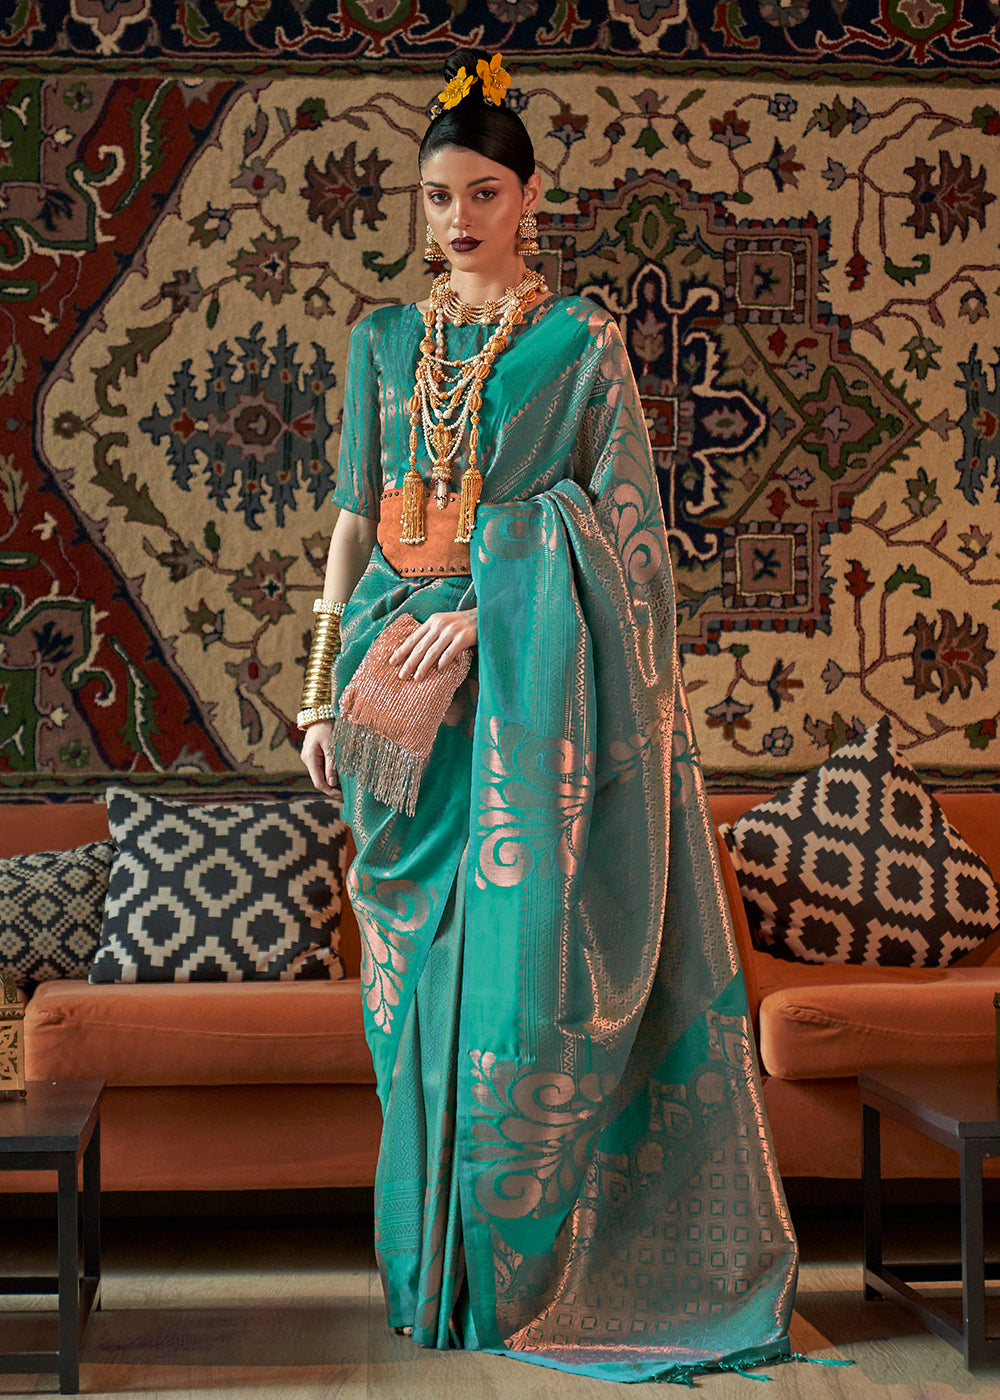 Buy Now Turquoise Blue Blended Woven Zari Brocade Silk Saree Online in USA, UK, Canada & Worldwide at Empress Clothing. 